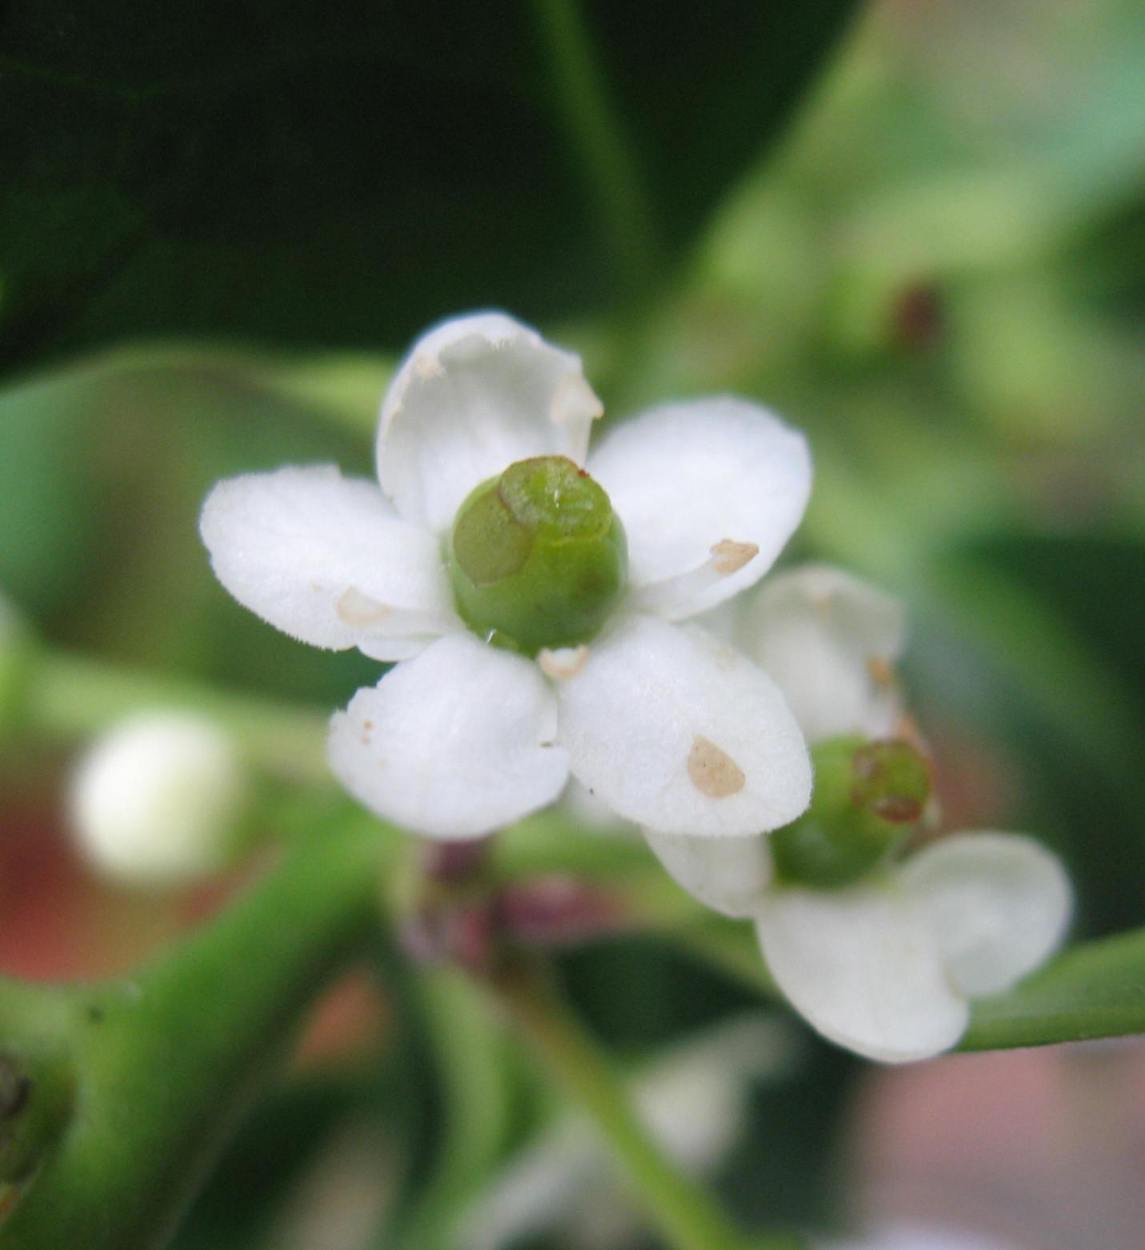 Holly flower with green berry